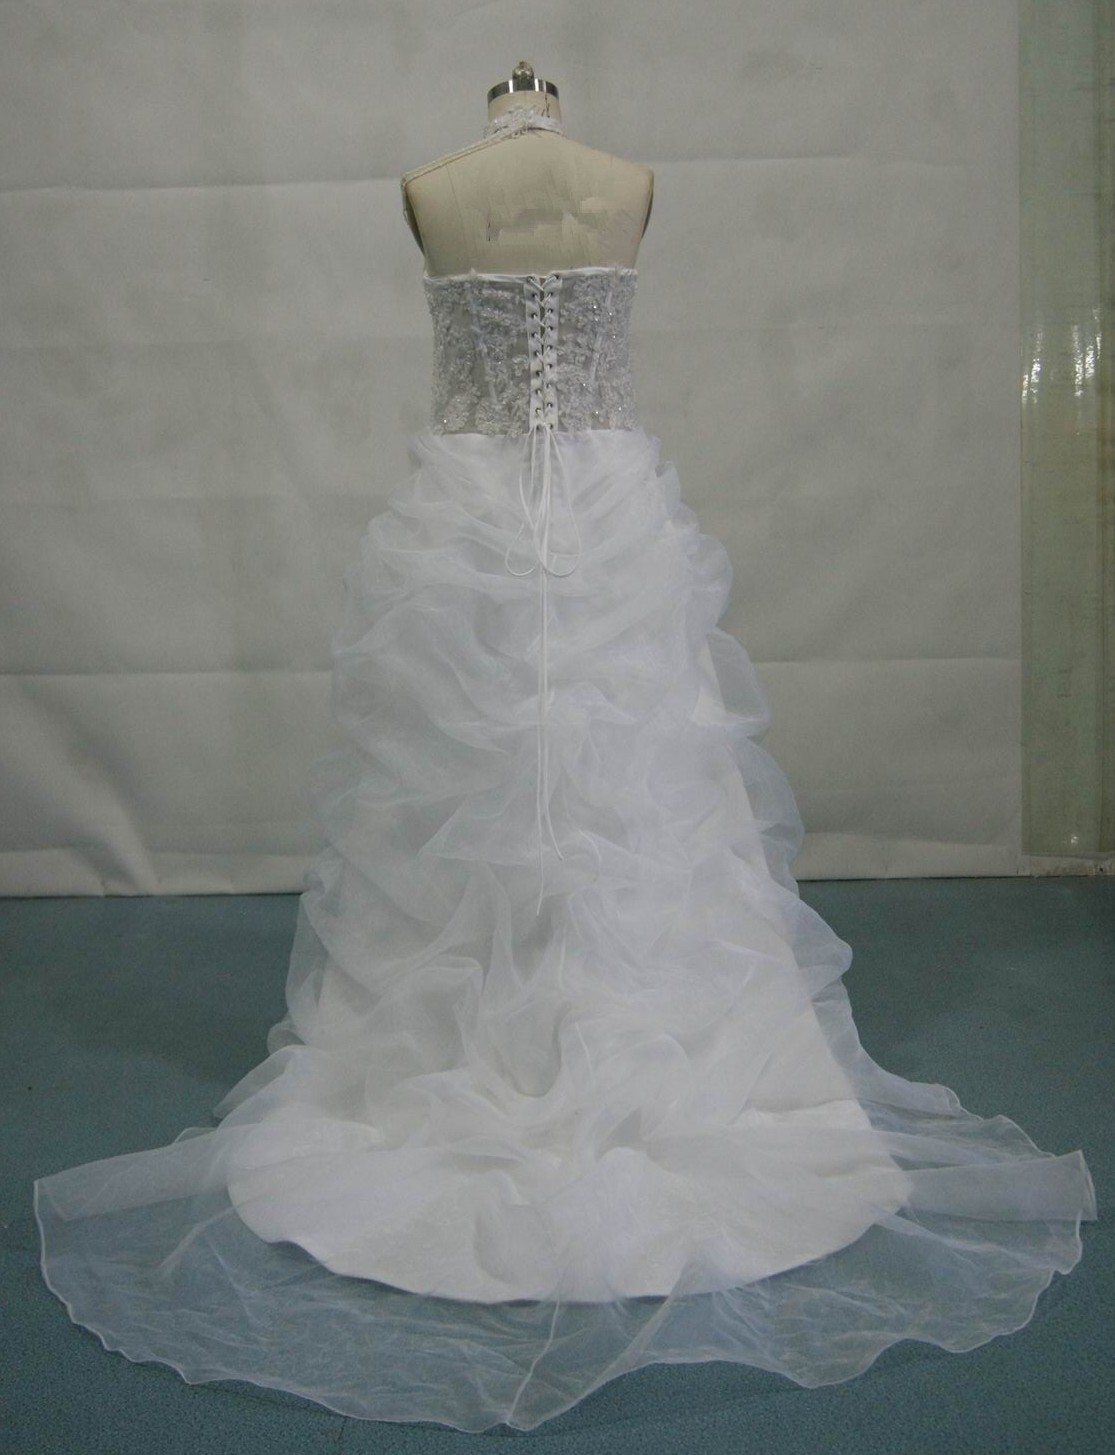 corseted-back gown is pictured in white with a see-through bodice